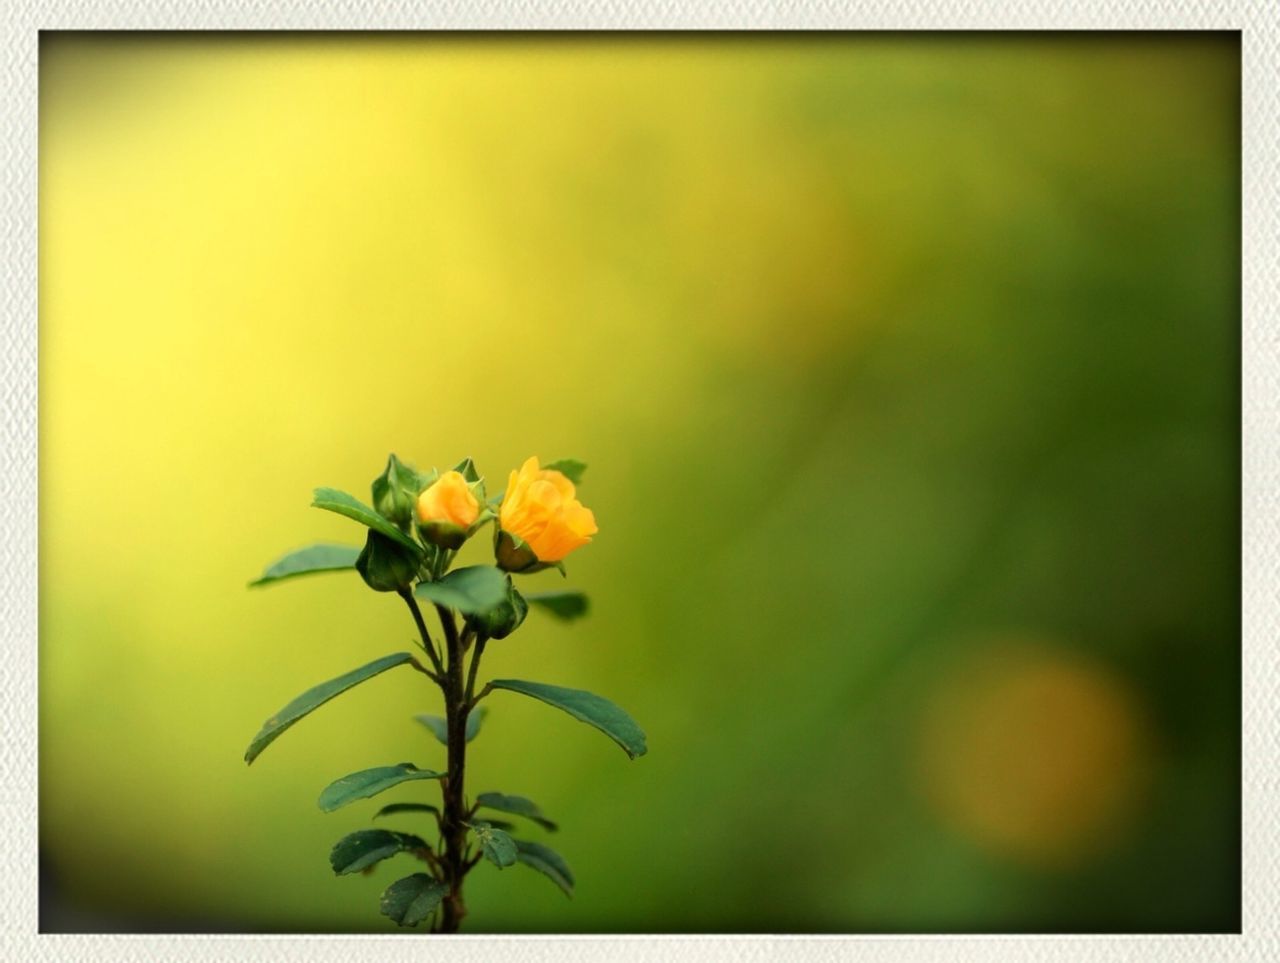 flower, transfer print, freshness, petal, fragility, auto post production filter, growth, flower head, yellow, beauty in nature, nature, plant, blooming, focus on foreground, close-up, stem, in bloom, bud, blossom, leaf